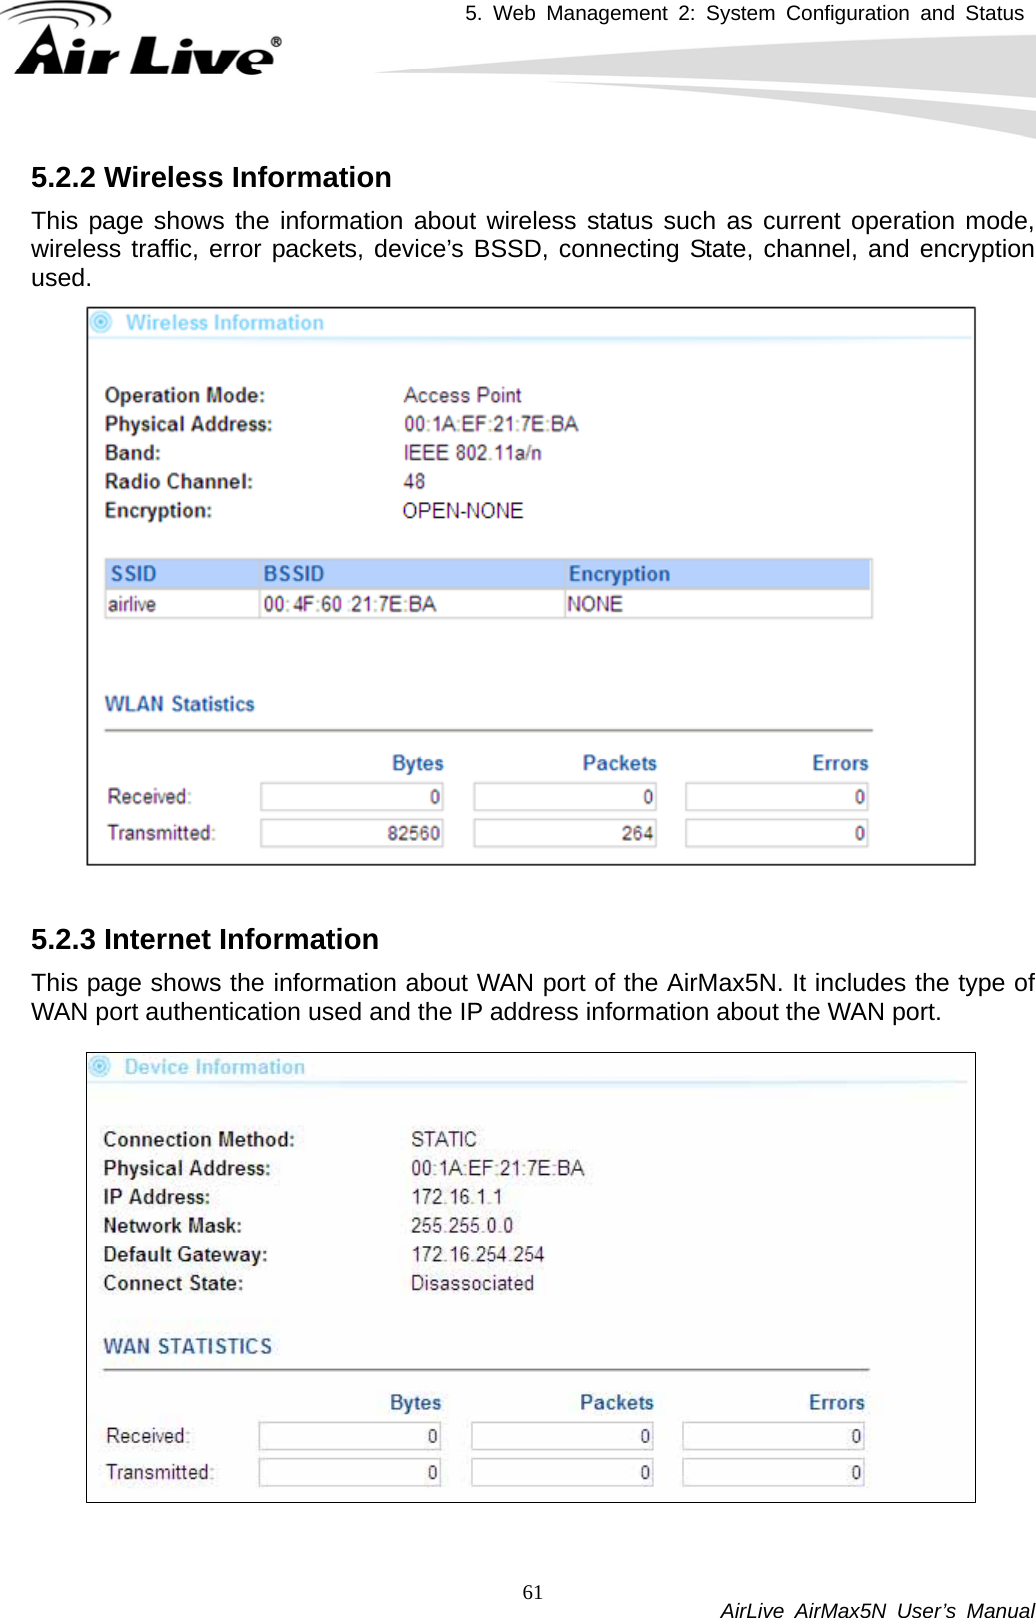 5. Web Management 2: System Configuration and Status          AirLive AirMax5N User’s Manual 615.2.2 Wireless Information This page shows the information about wireless status such as current operation mode, wireless traffic, error packets, device’s BSSD, connecting State, channel, and encryption used.    5.2.3 Internet Information This page shows the information about WAN port of the AirMax5N. It includes the type of WAN port authentication used and the IP address information about the WAN port.  